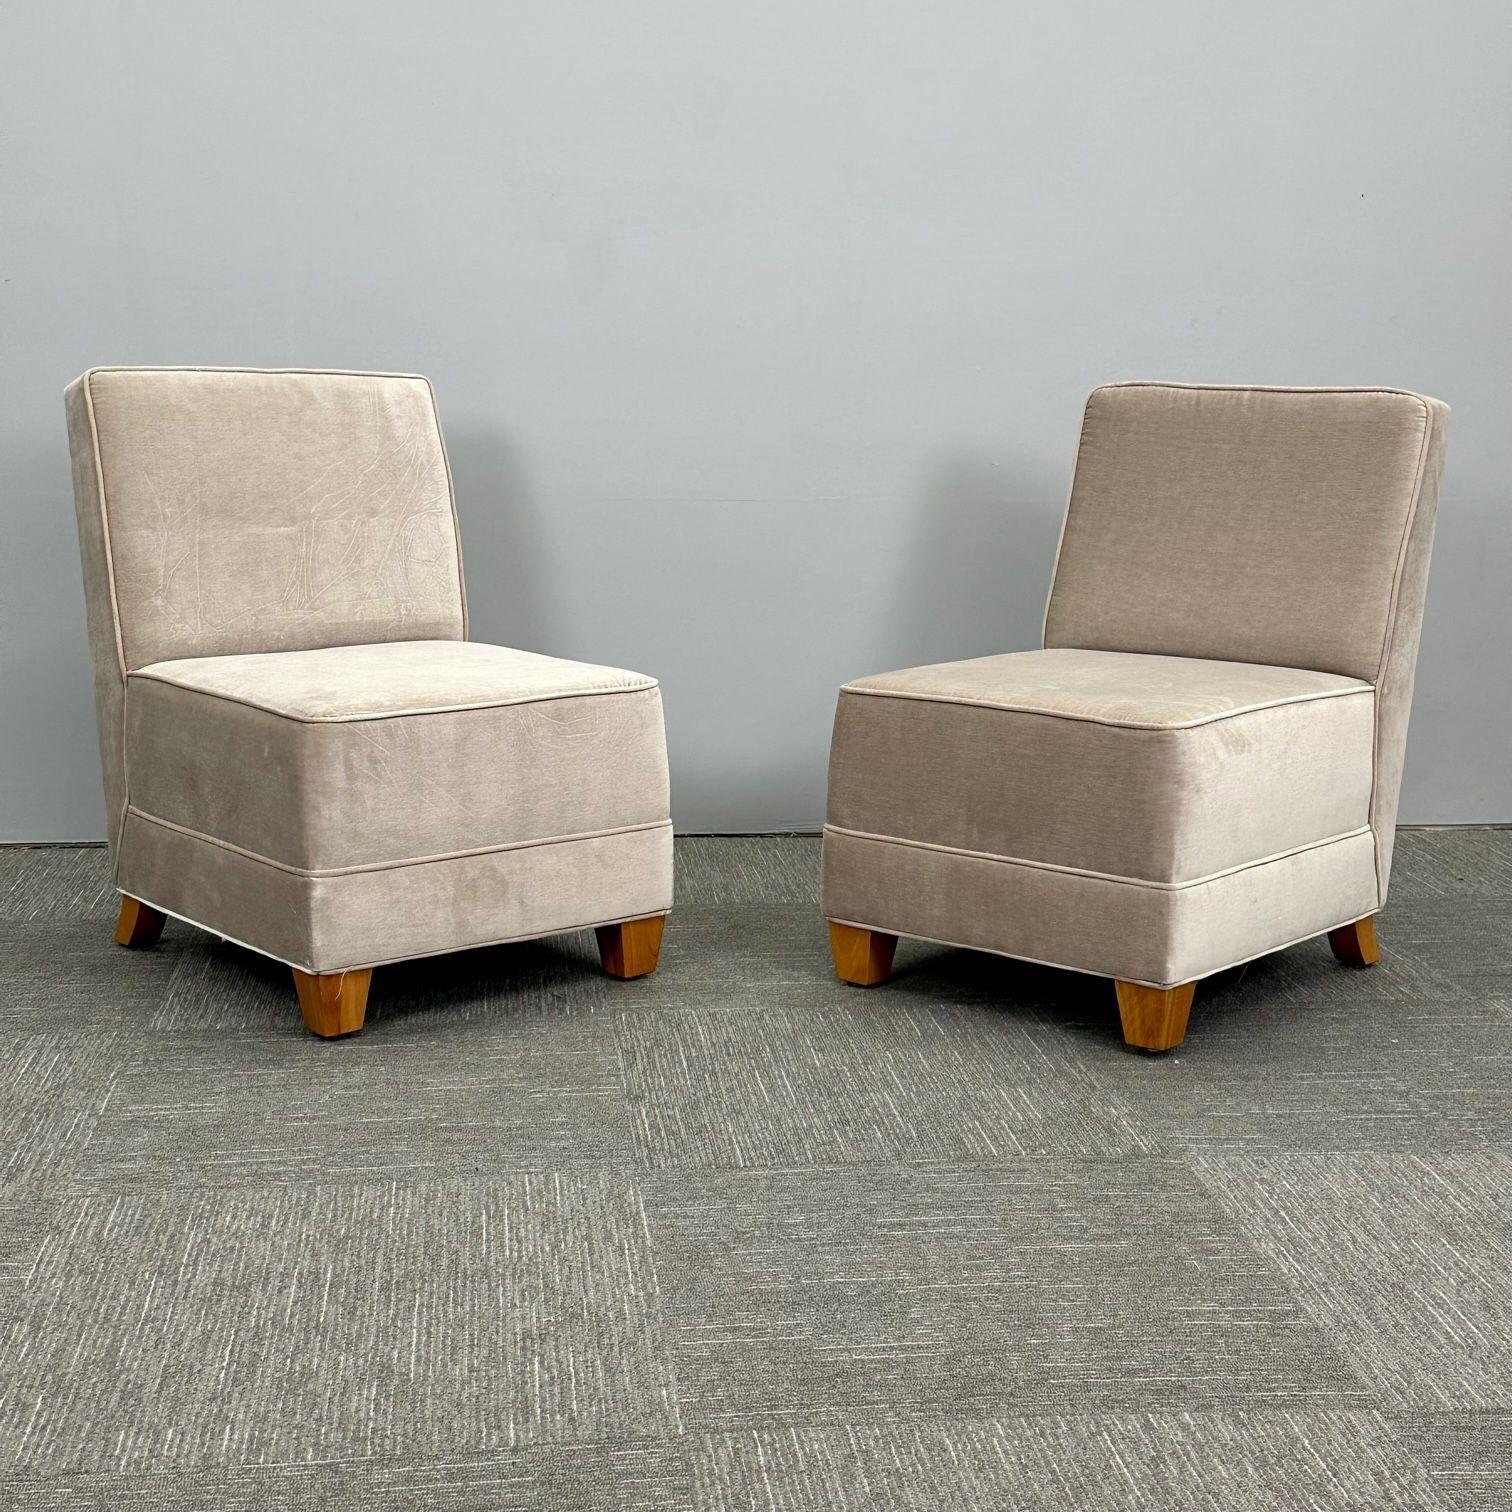 Pair Mid-Century Modern Jean-Michel Frank Style Lounge / Slipper Chairs, Mohair

Pair of chunky modernist Jean-Michel Frank inspired deep cushion upholstered boudoir or side chairs. Each supported by a high seated cushion and slightly titled back;